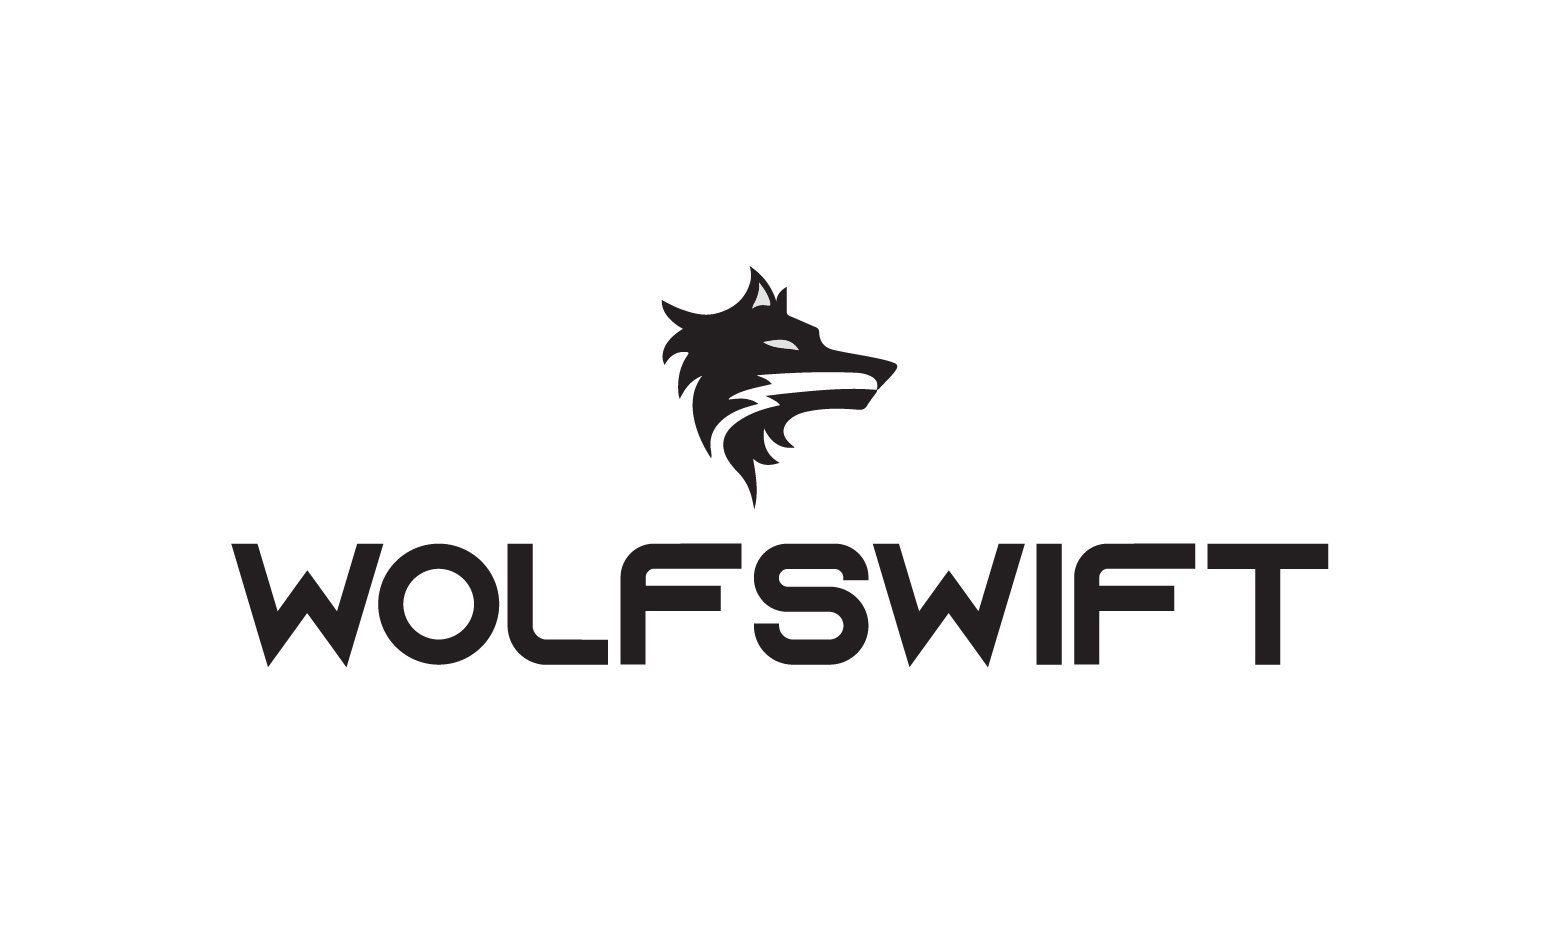 WolfSwift.com - Creative brandable domain for sale